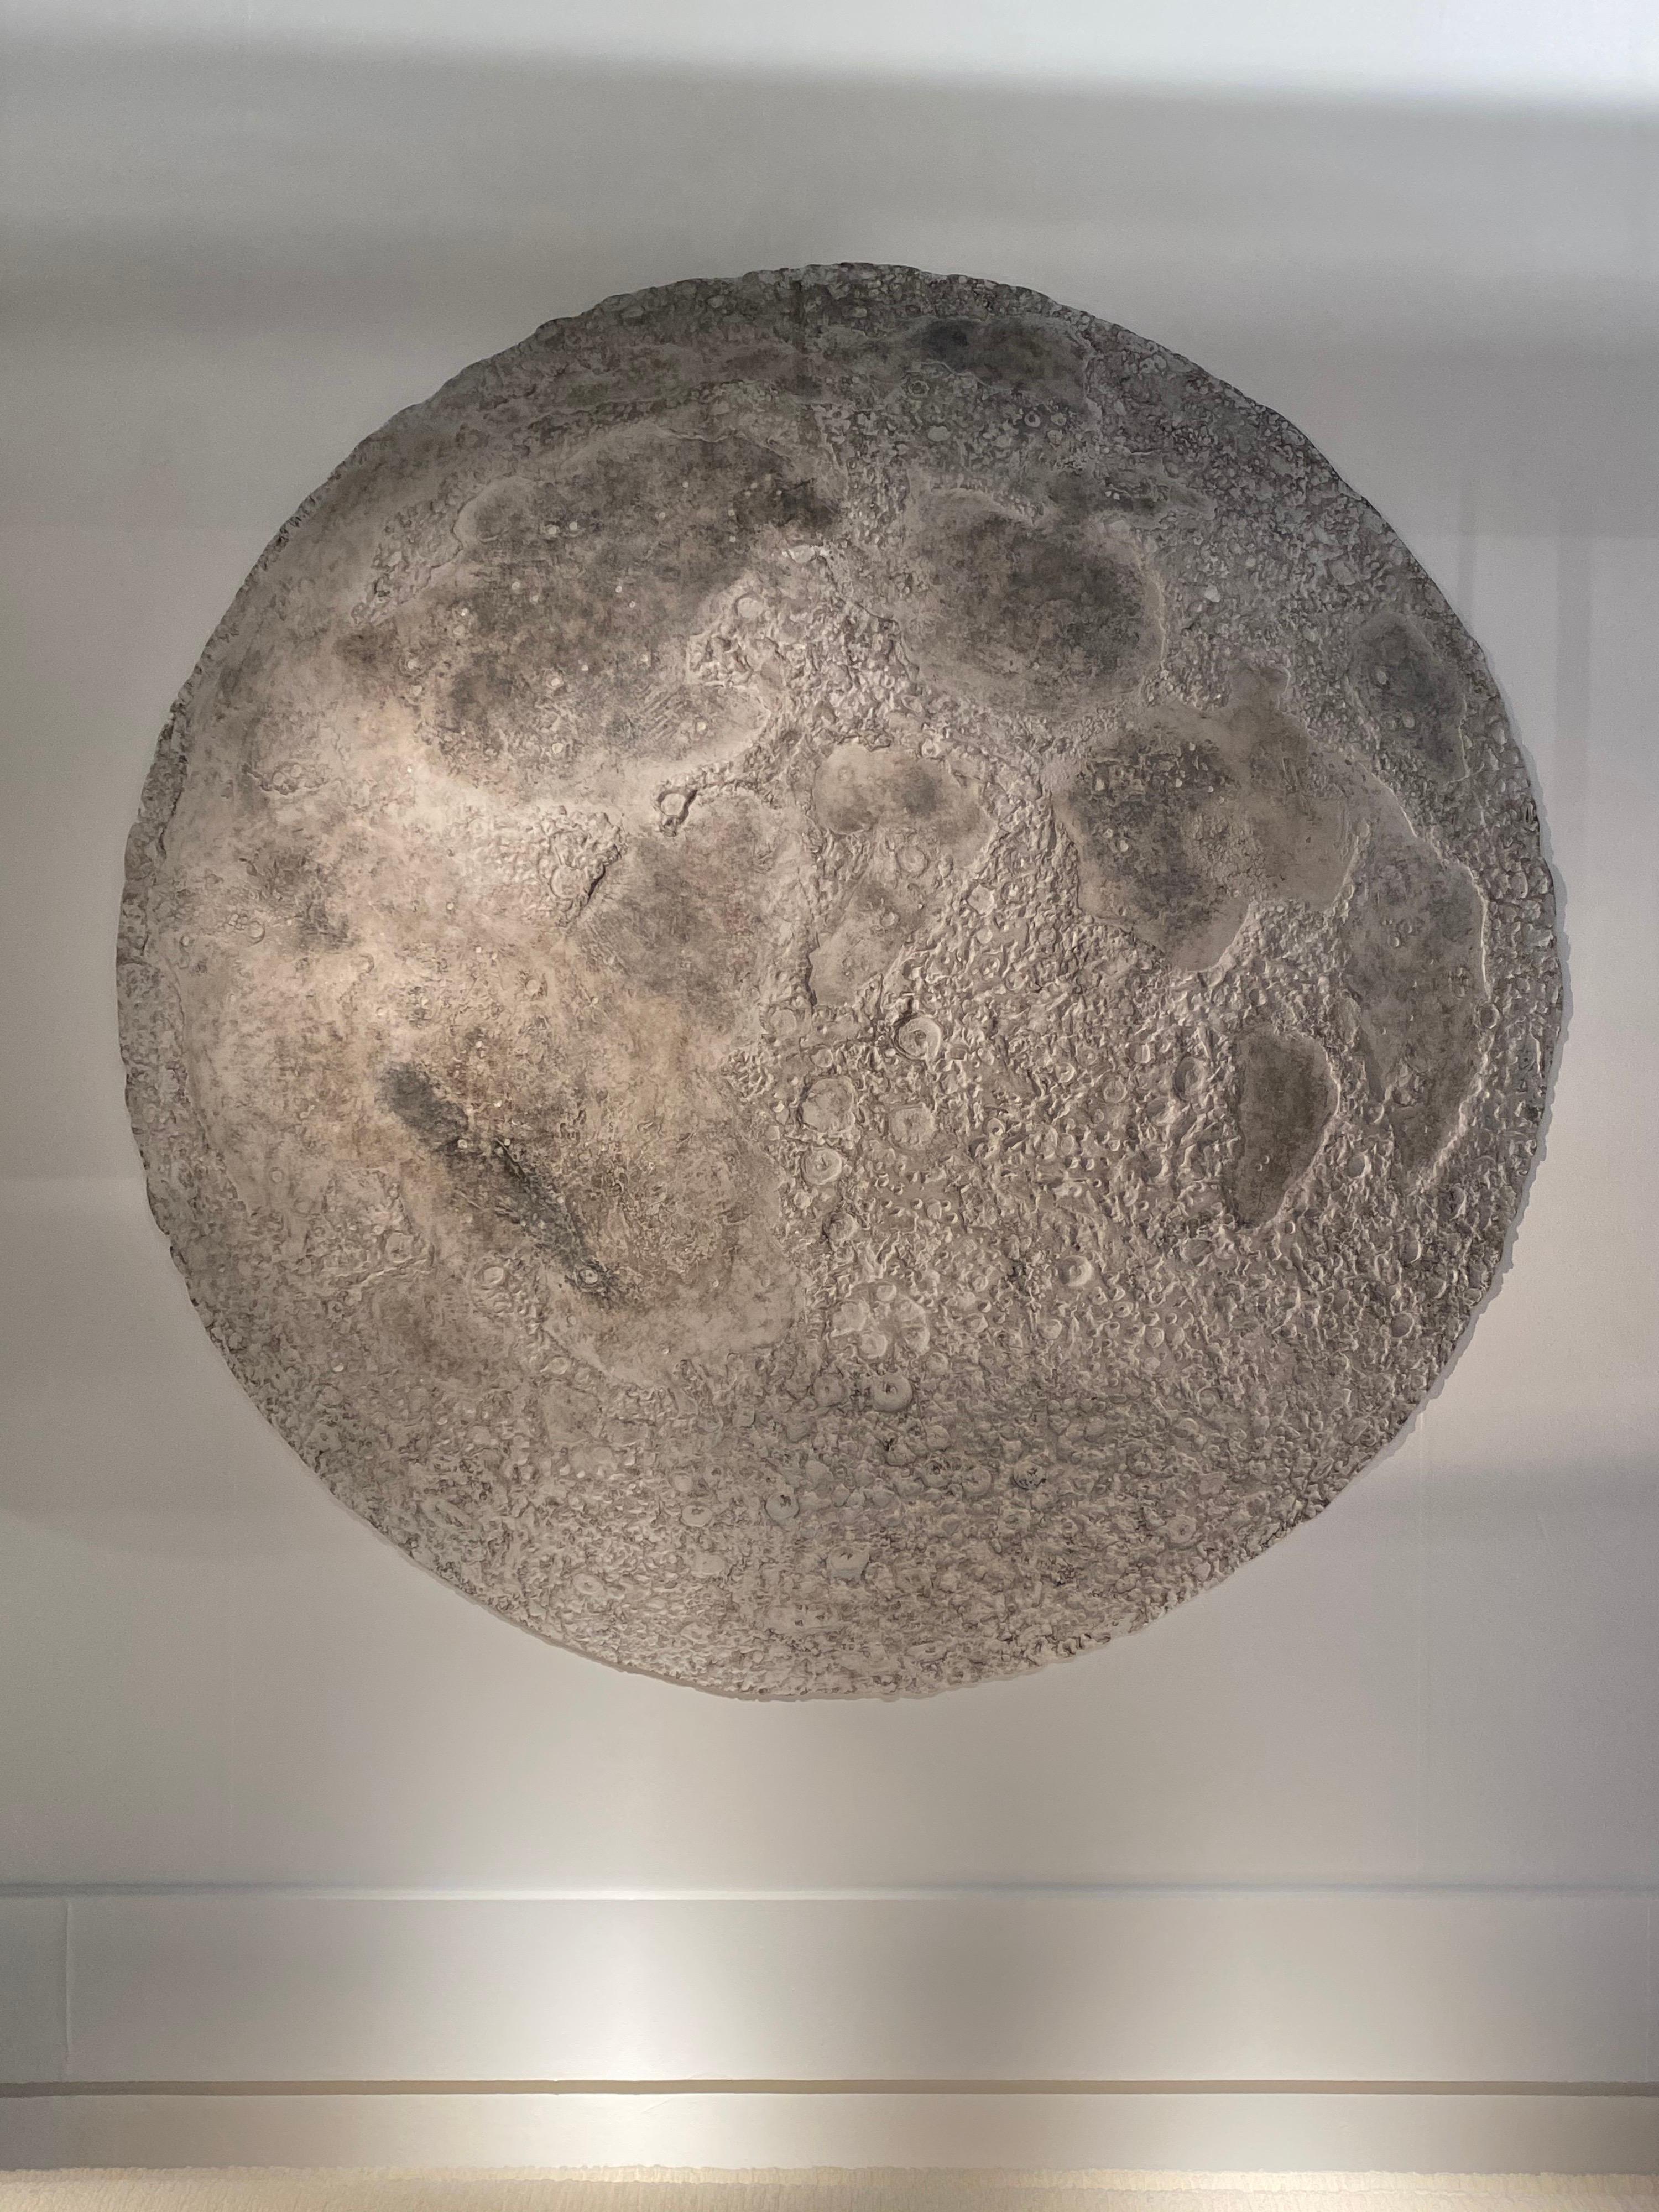  Moon wall-mounted sculpture by the French artist Michel Pichard
Edition 4/20
Measures: larger dimensions 150 cm diameter for 20 cm depth.
